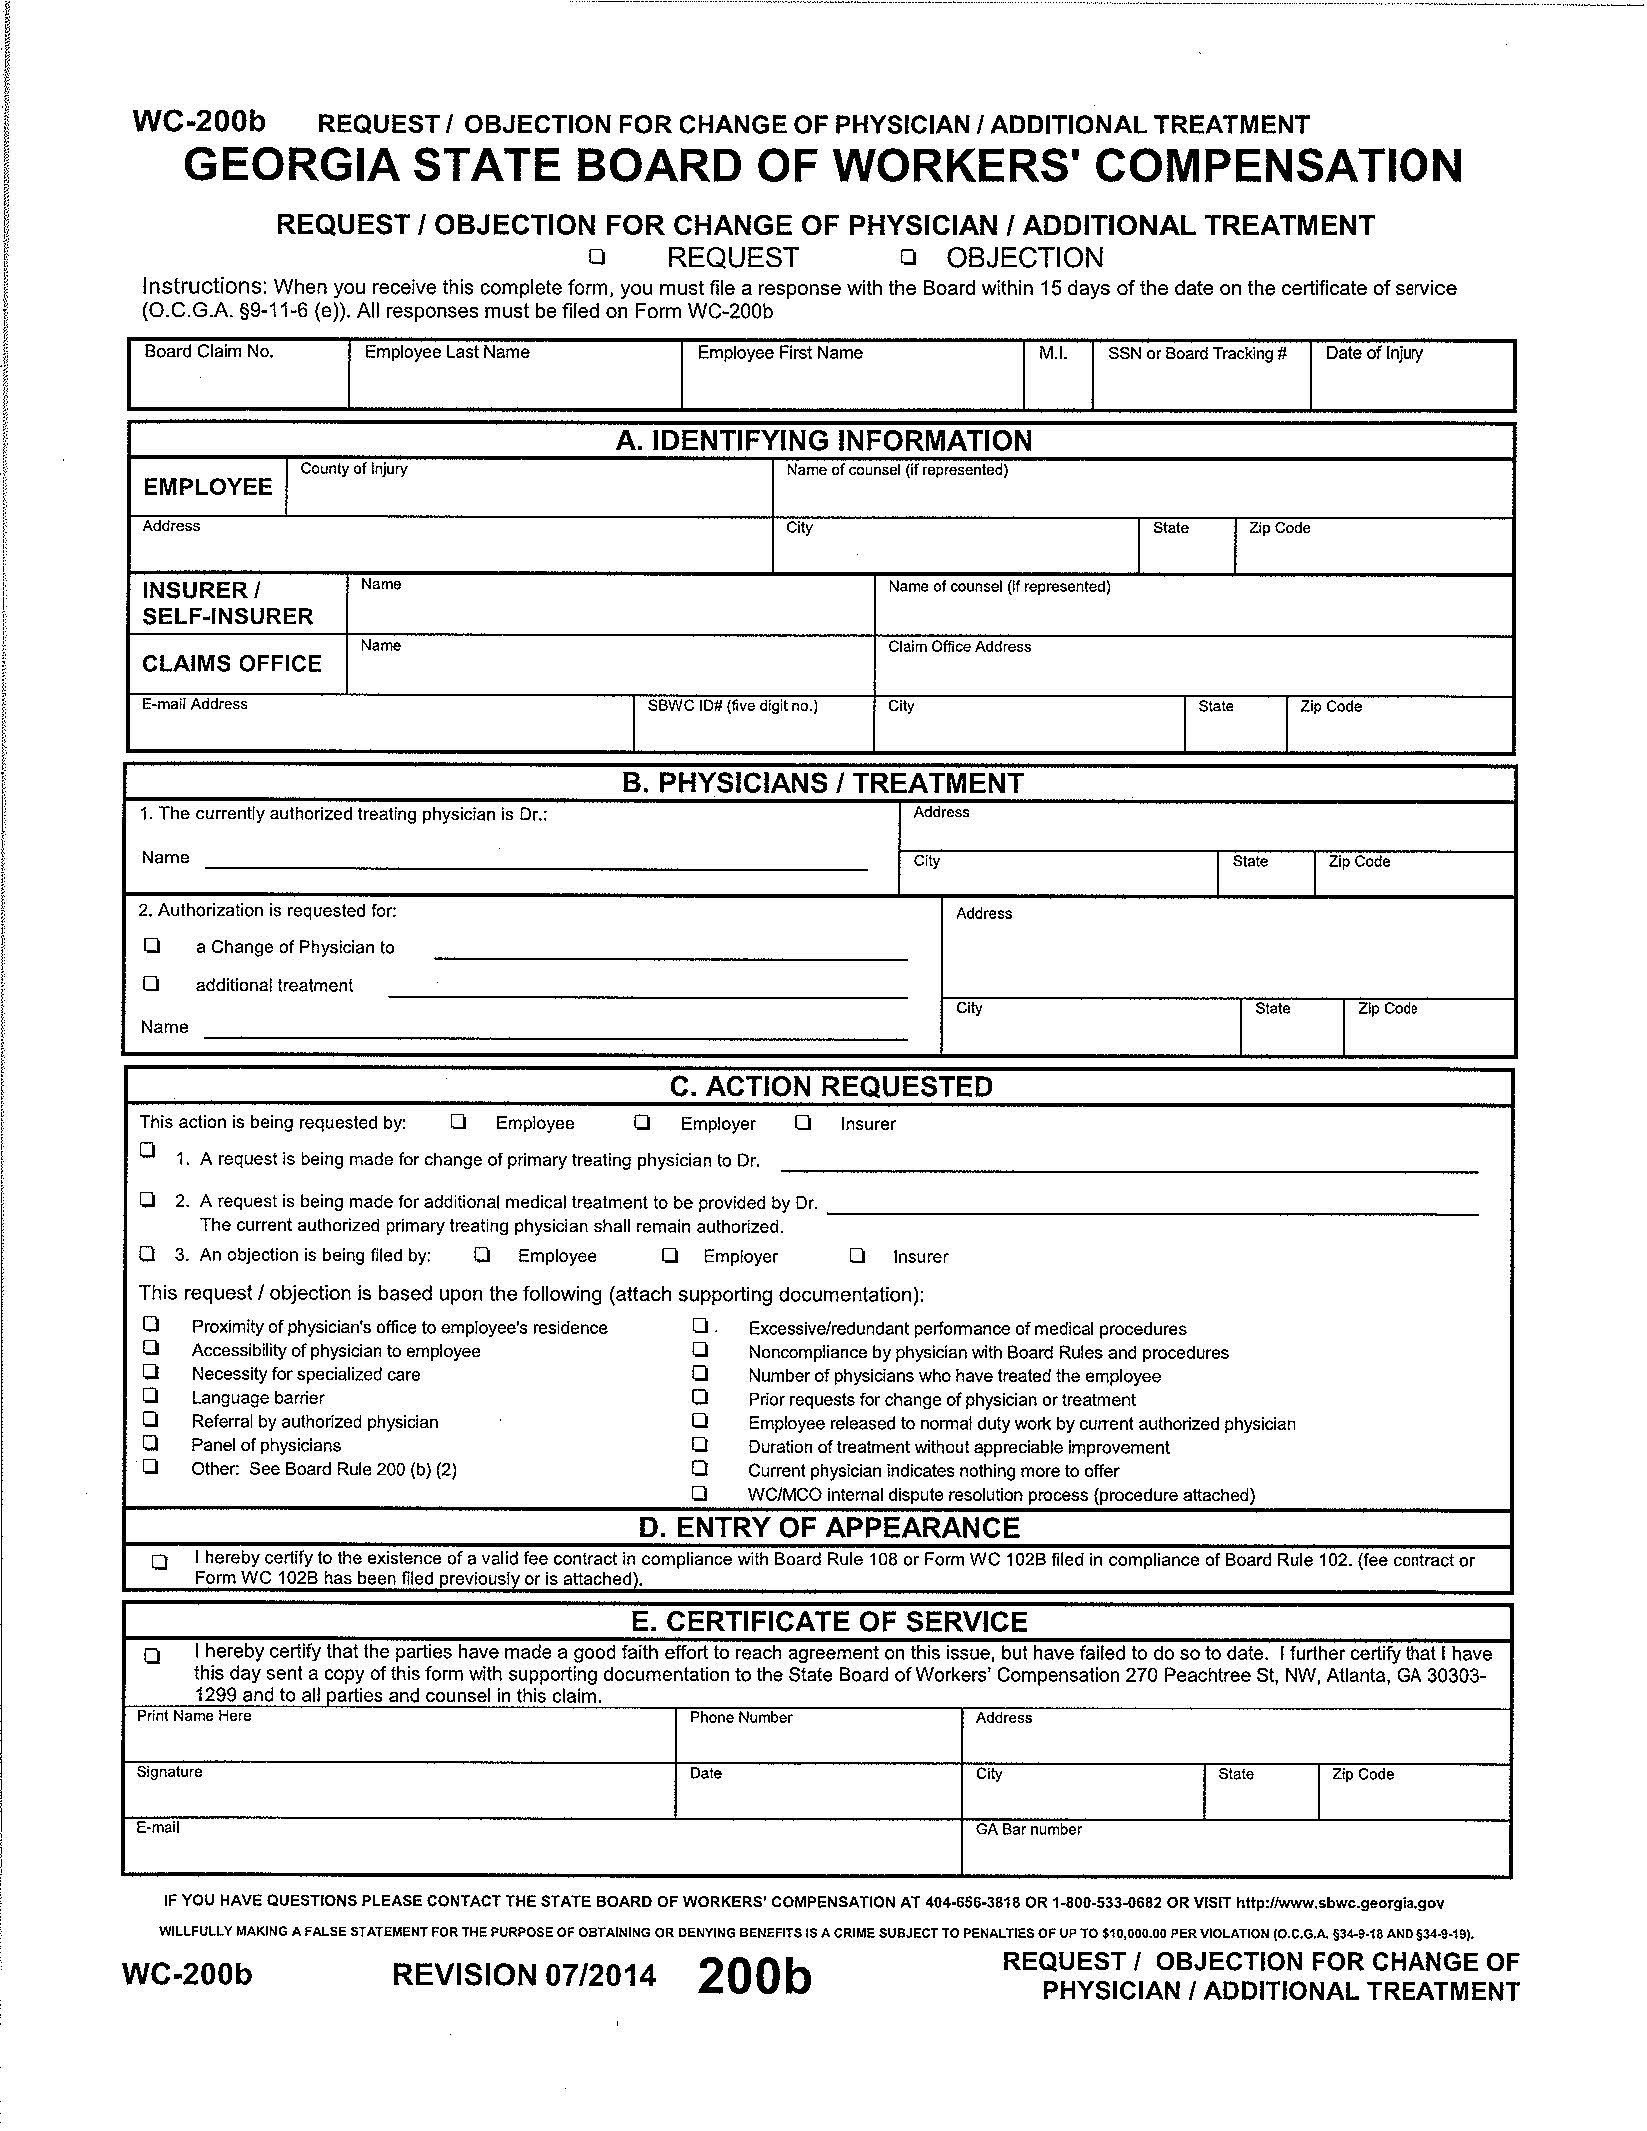 Tennessee Workers pensation Forms